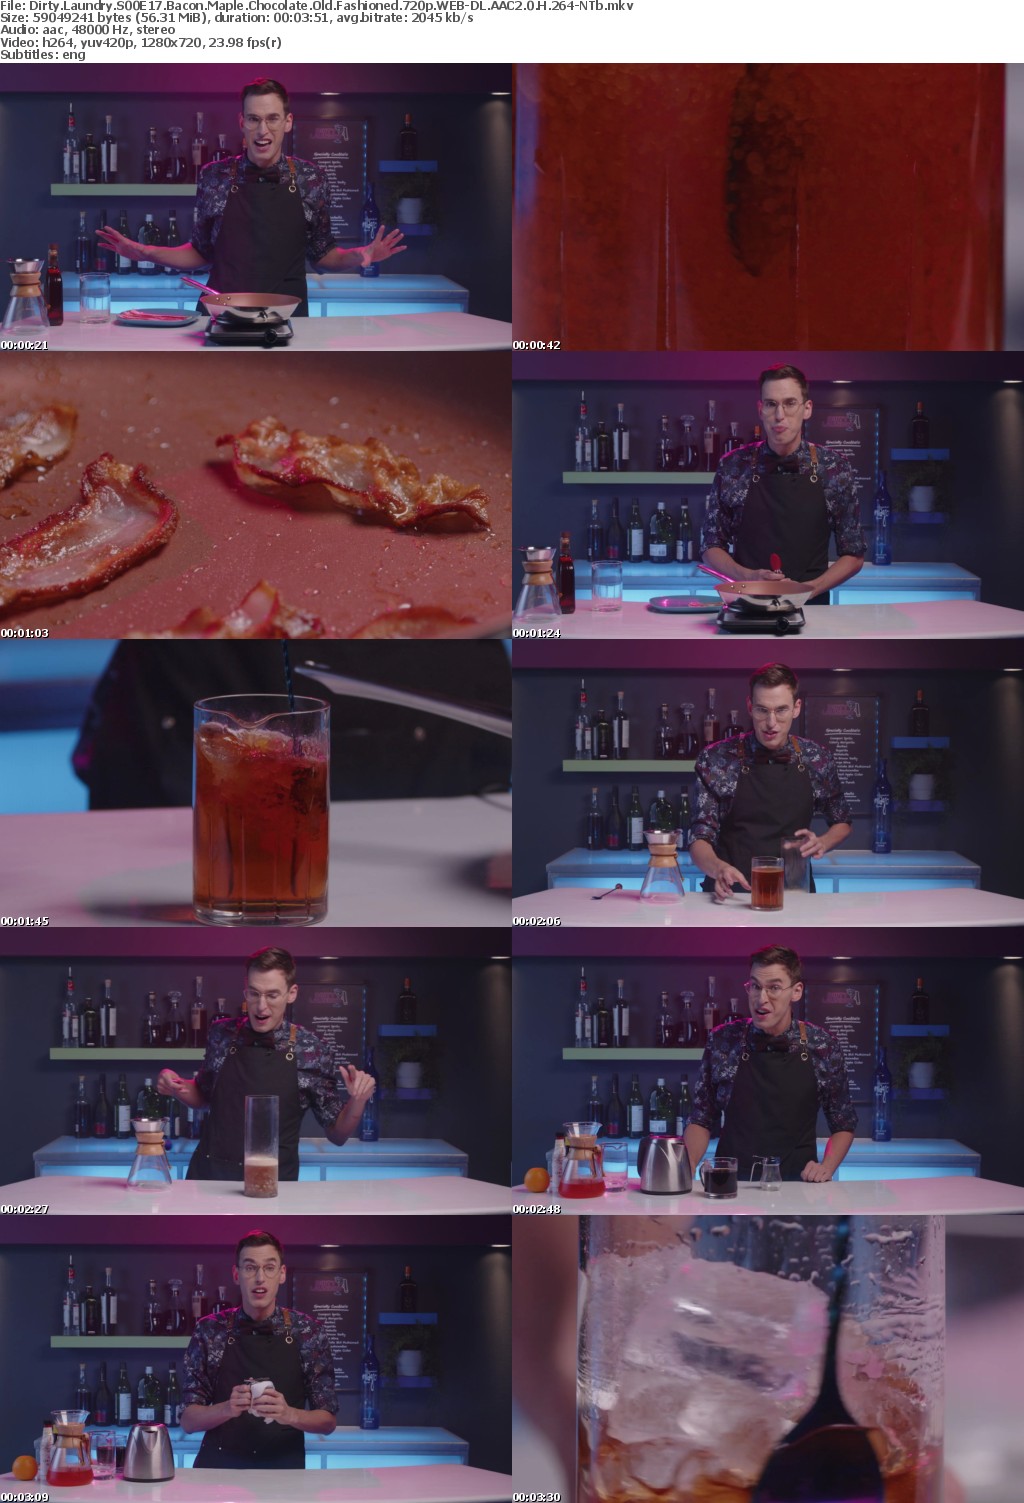 Dirty Laundry S00E17 Bacon Maple Chocolate Old Fashioned 720p WEB-DL AAC2 0 H 264-NTb